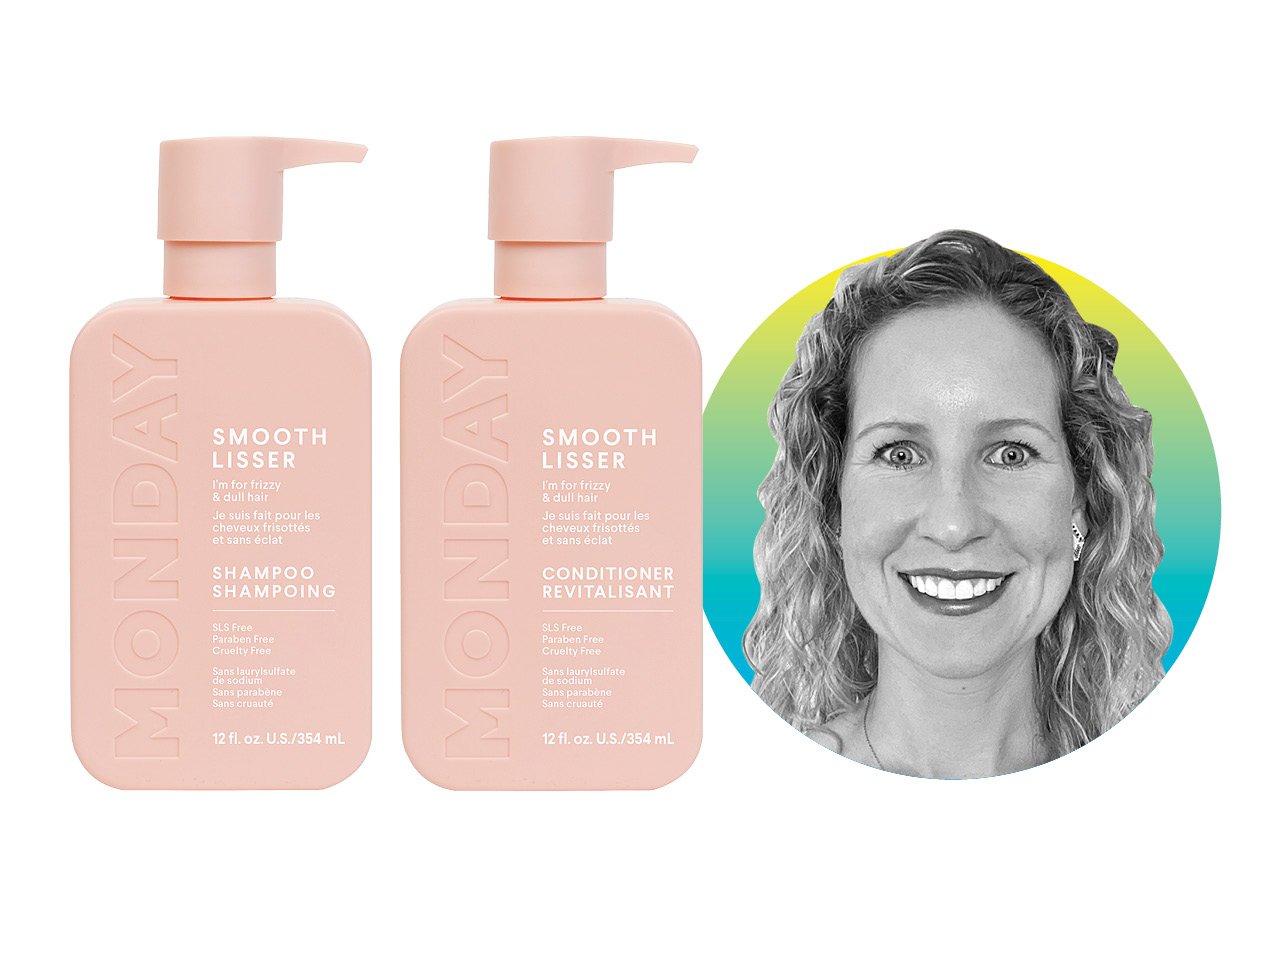 A Chatelaine reader reviews the Monday Haircare Smooth shampoo and conditioner.